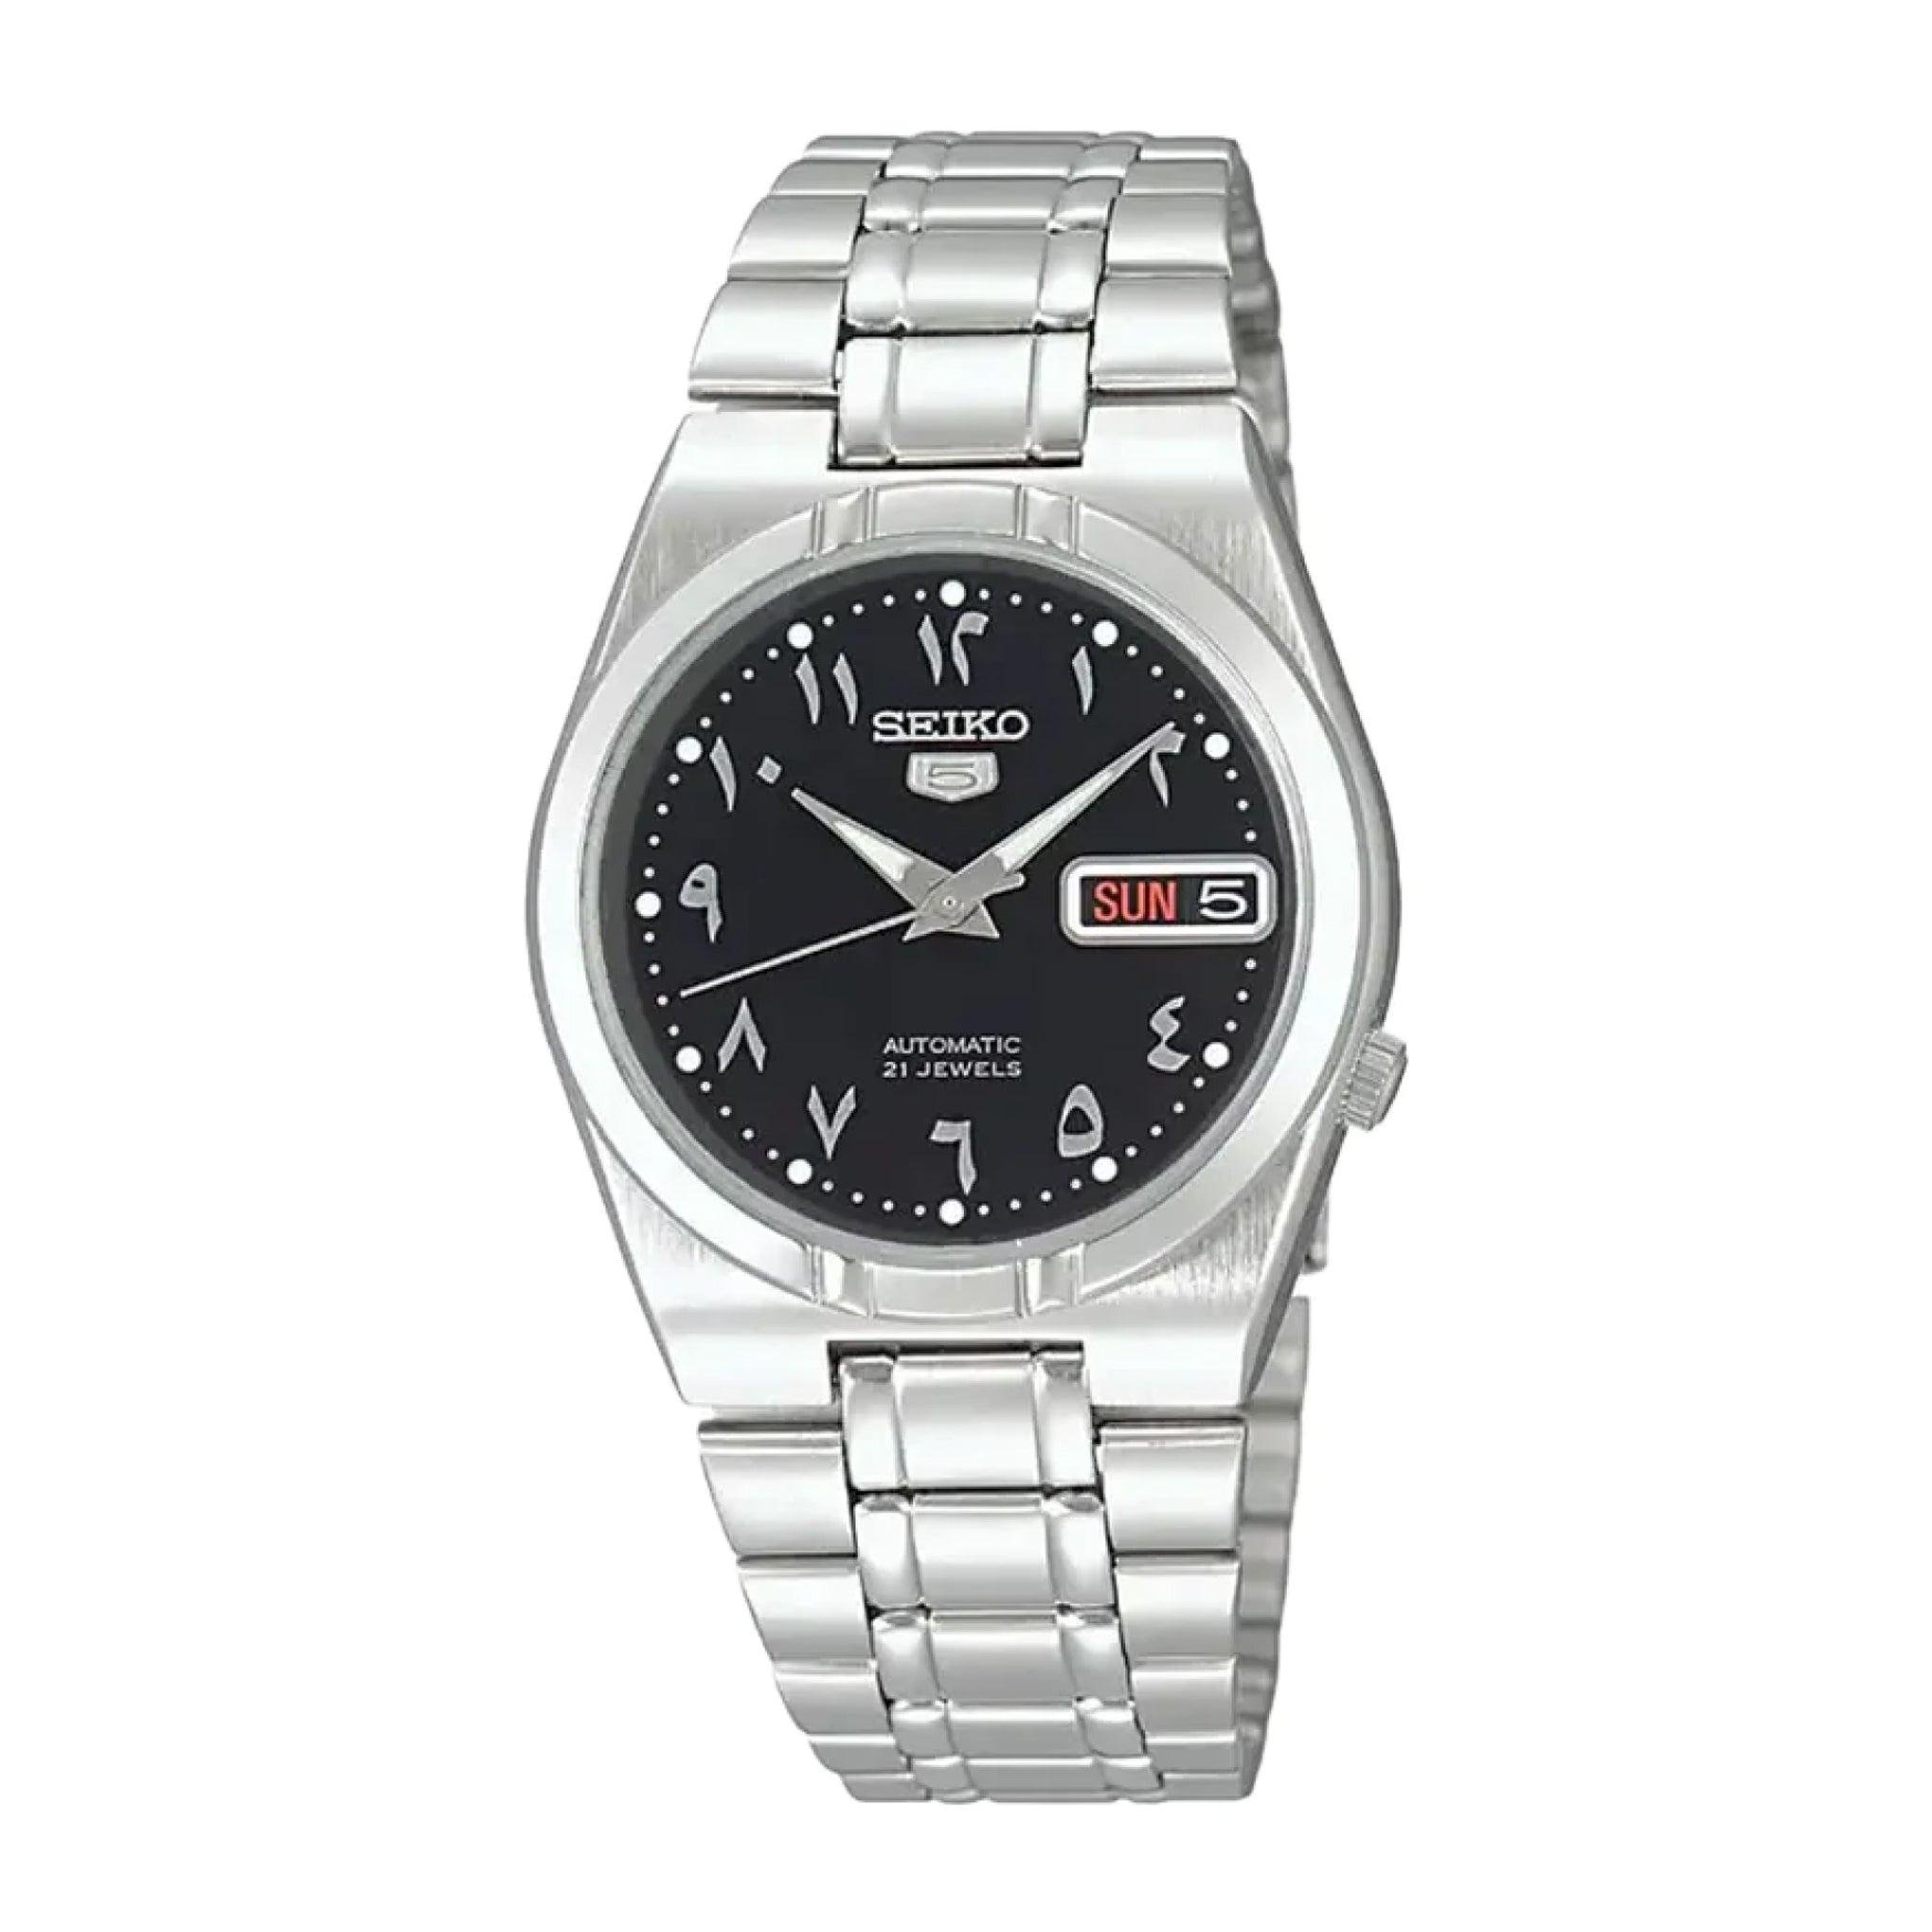 Seiko 5 Men's Automatic Black Dial Stainless Steel Watch Snk063j5